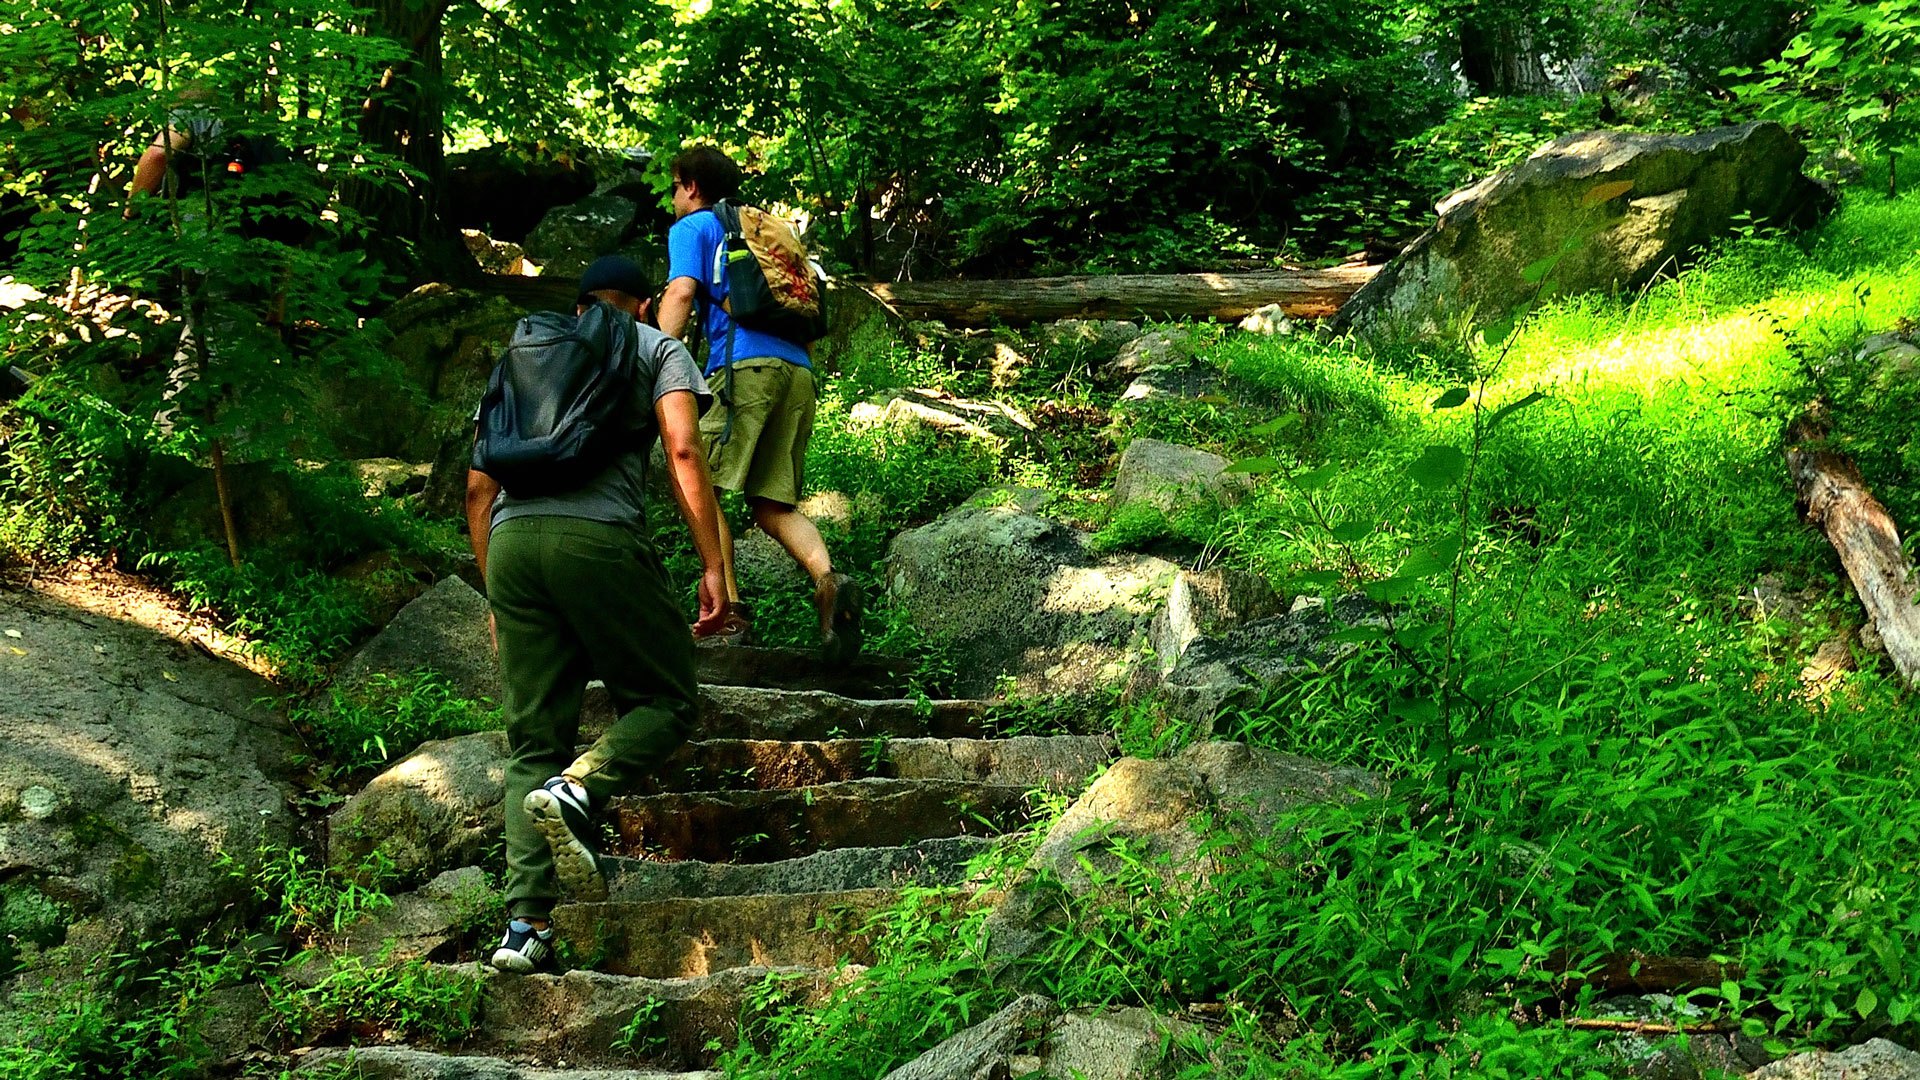 Hikers traverse the stone steps installed on the A.T. at Bear Mountain, New York.